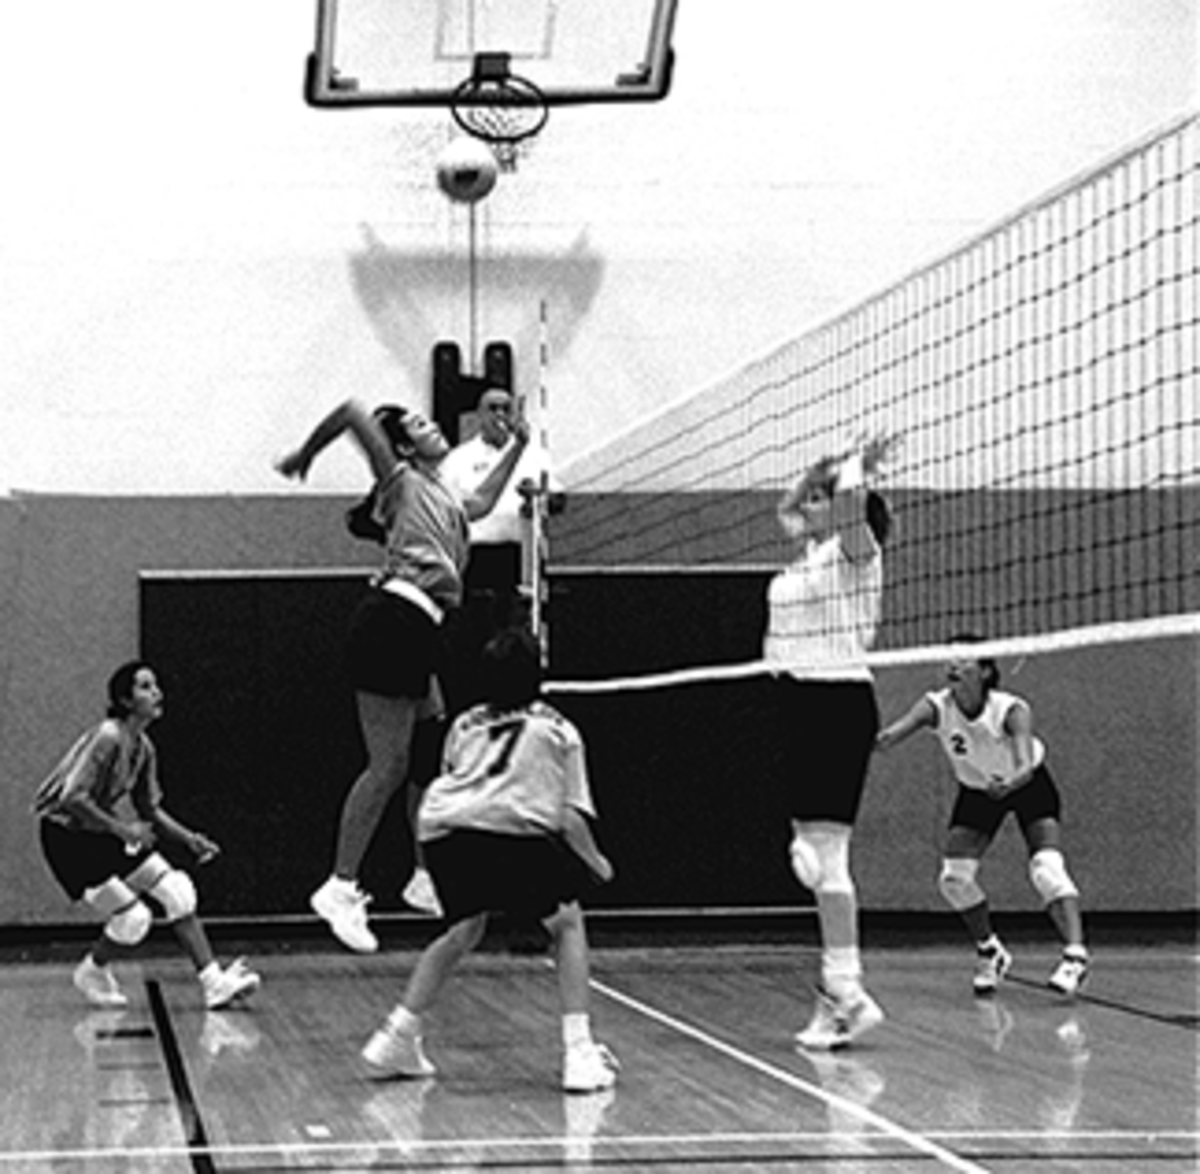 The baggy clothes of the 90s led many volleyball teams to switch to a baggier uniform like basketball players were wearing.